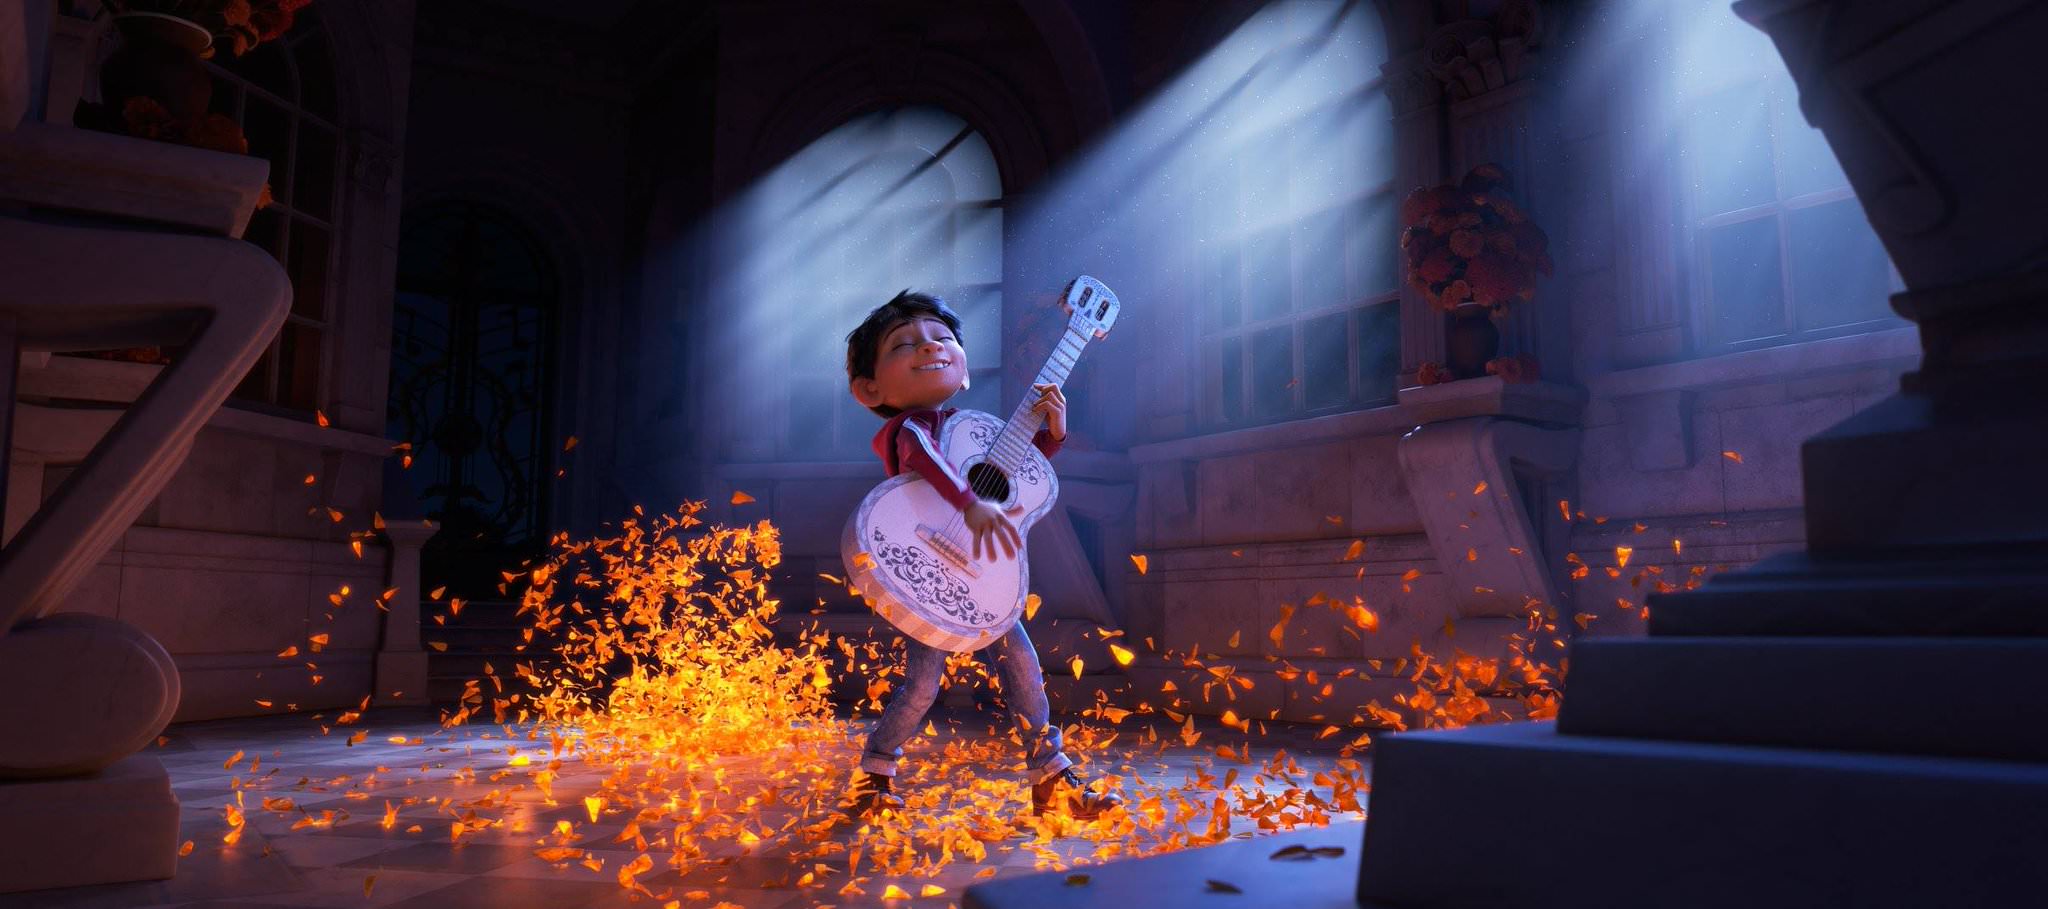 Coco official image